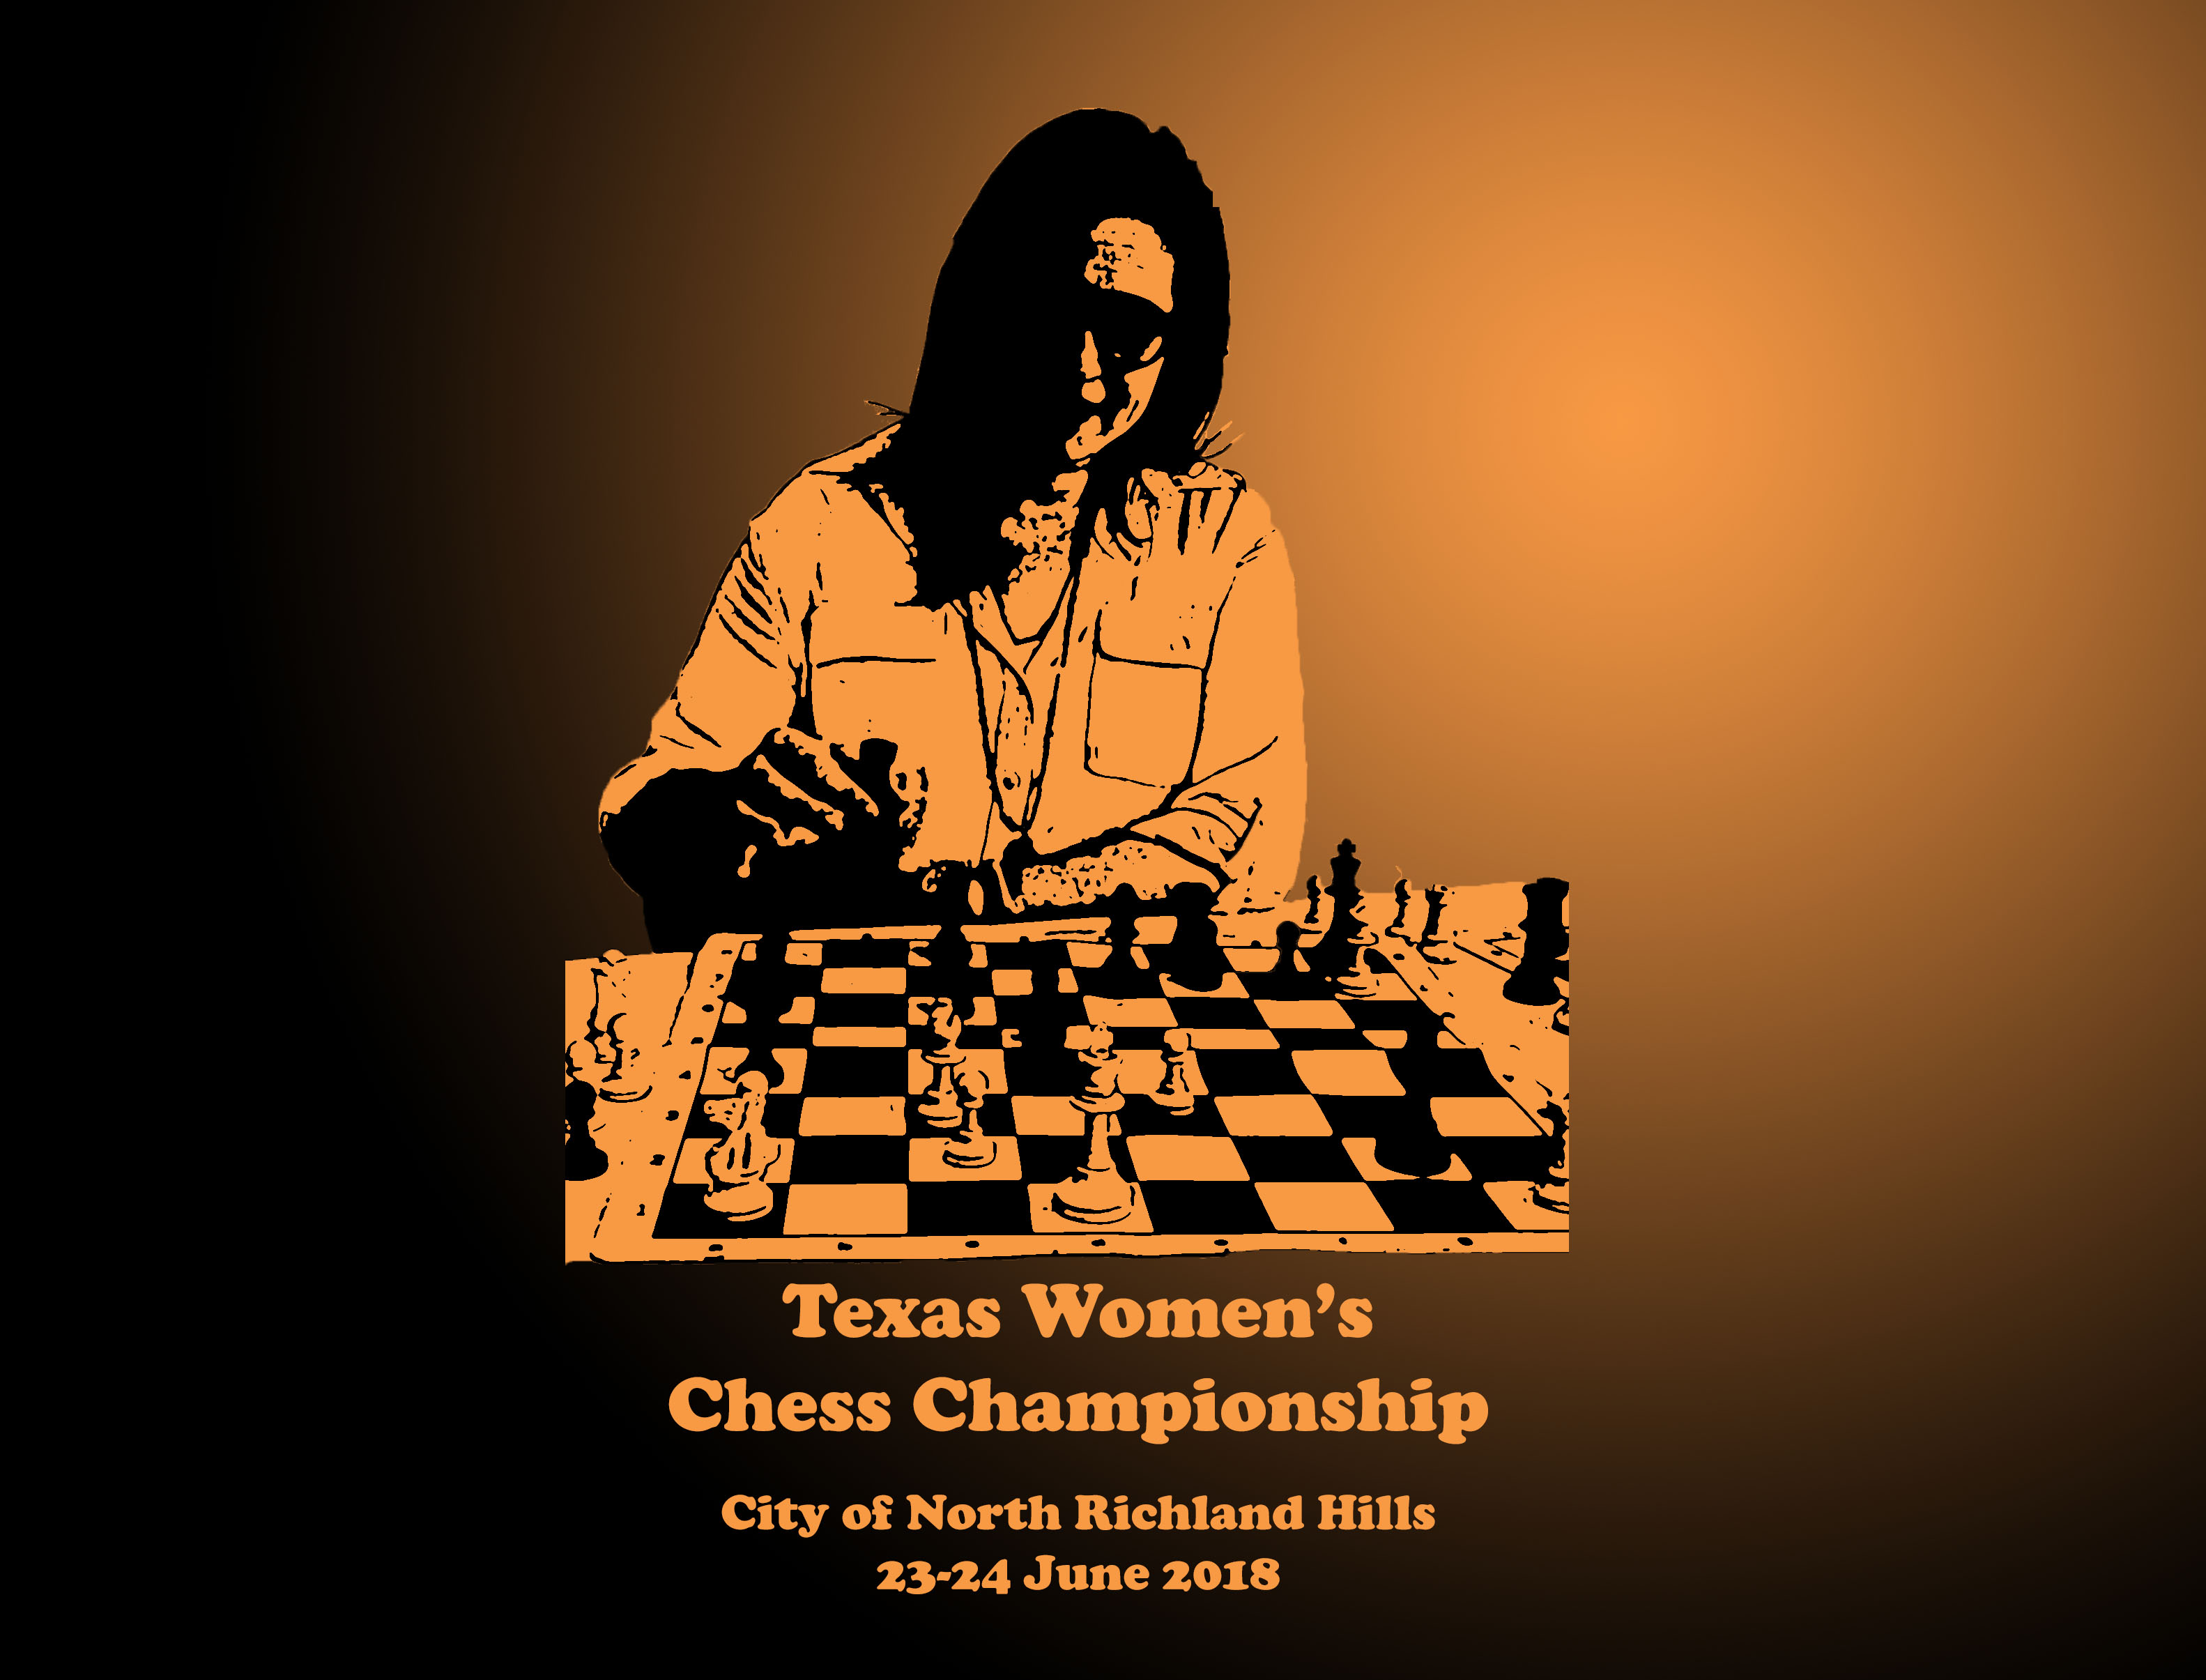 LOGO for 2018 Texas Women's Chess Championship.  Image and graphics by Jim Hollingsworth.